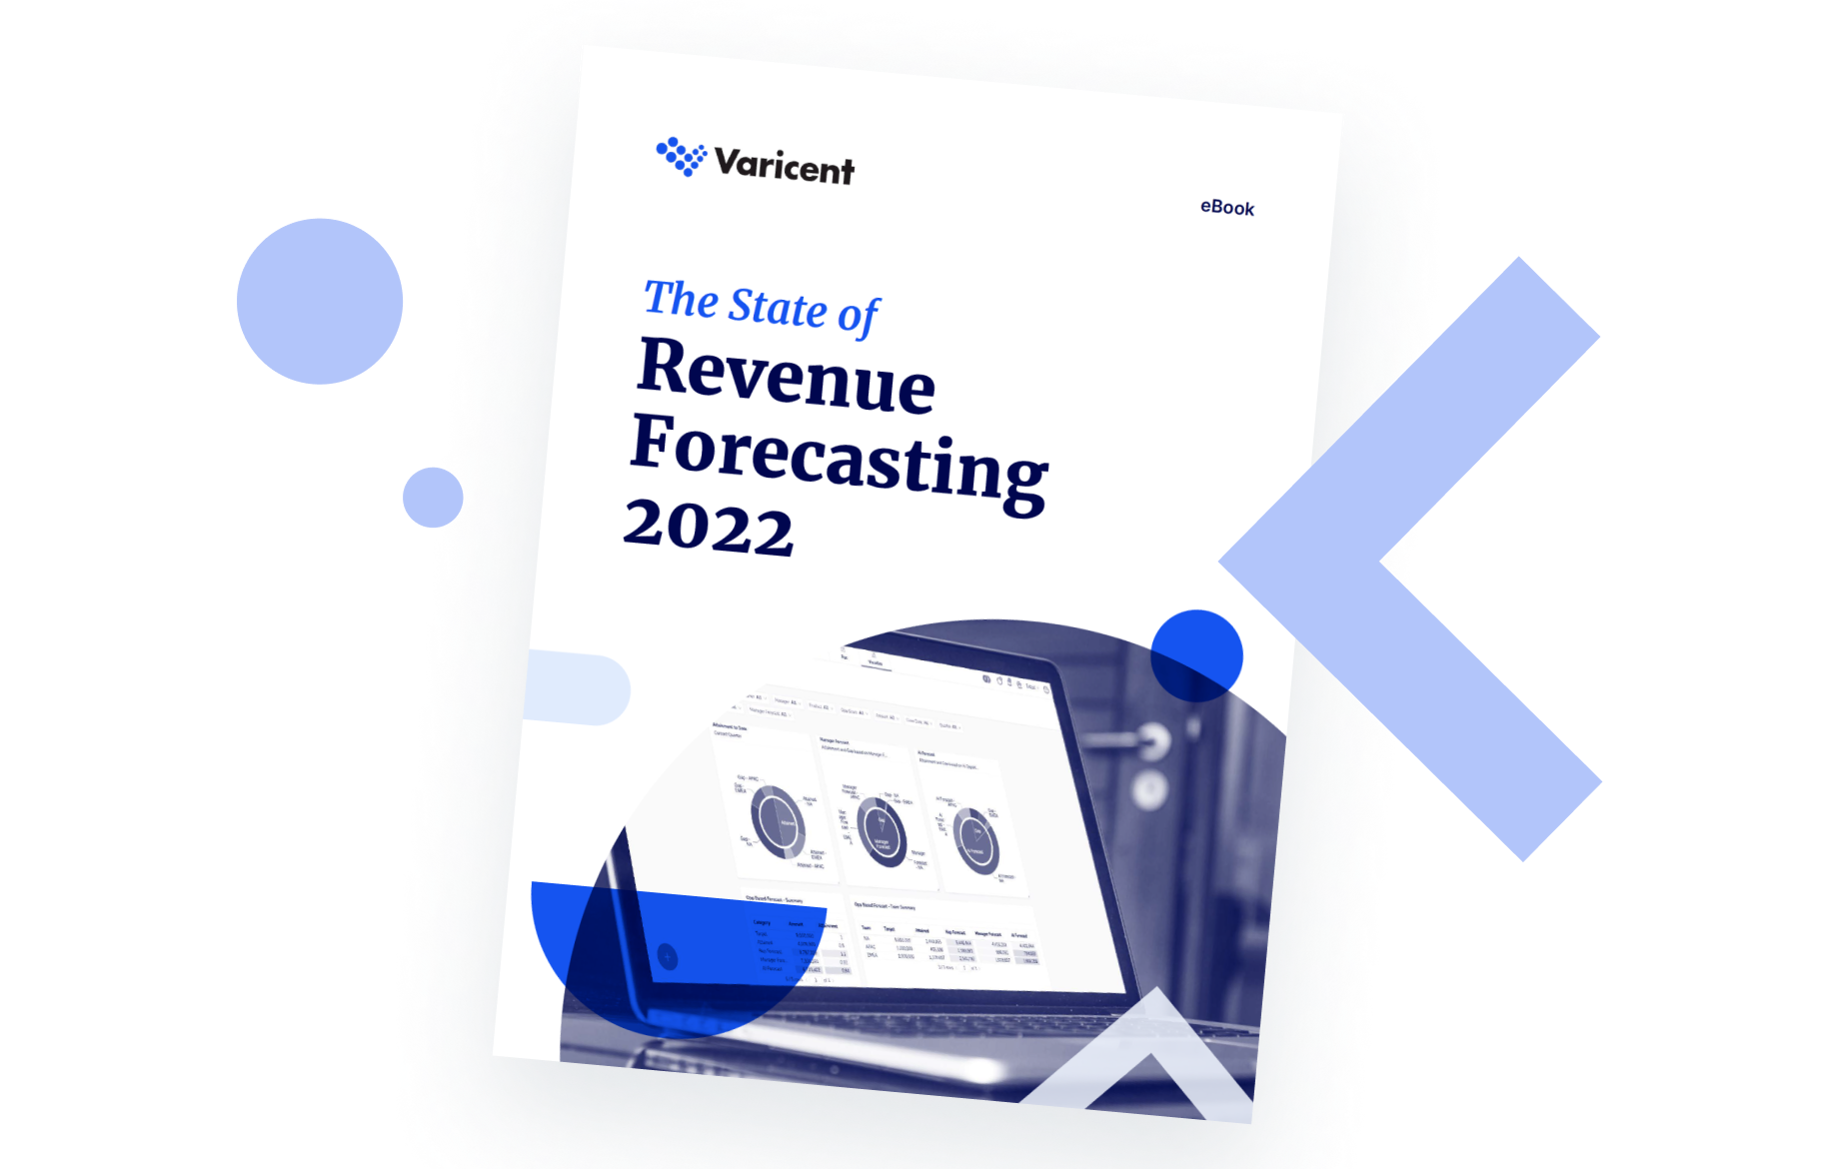 The State of Revenue Forecasting 2022